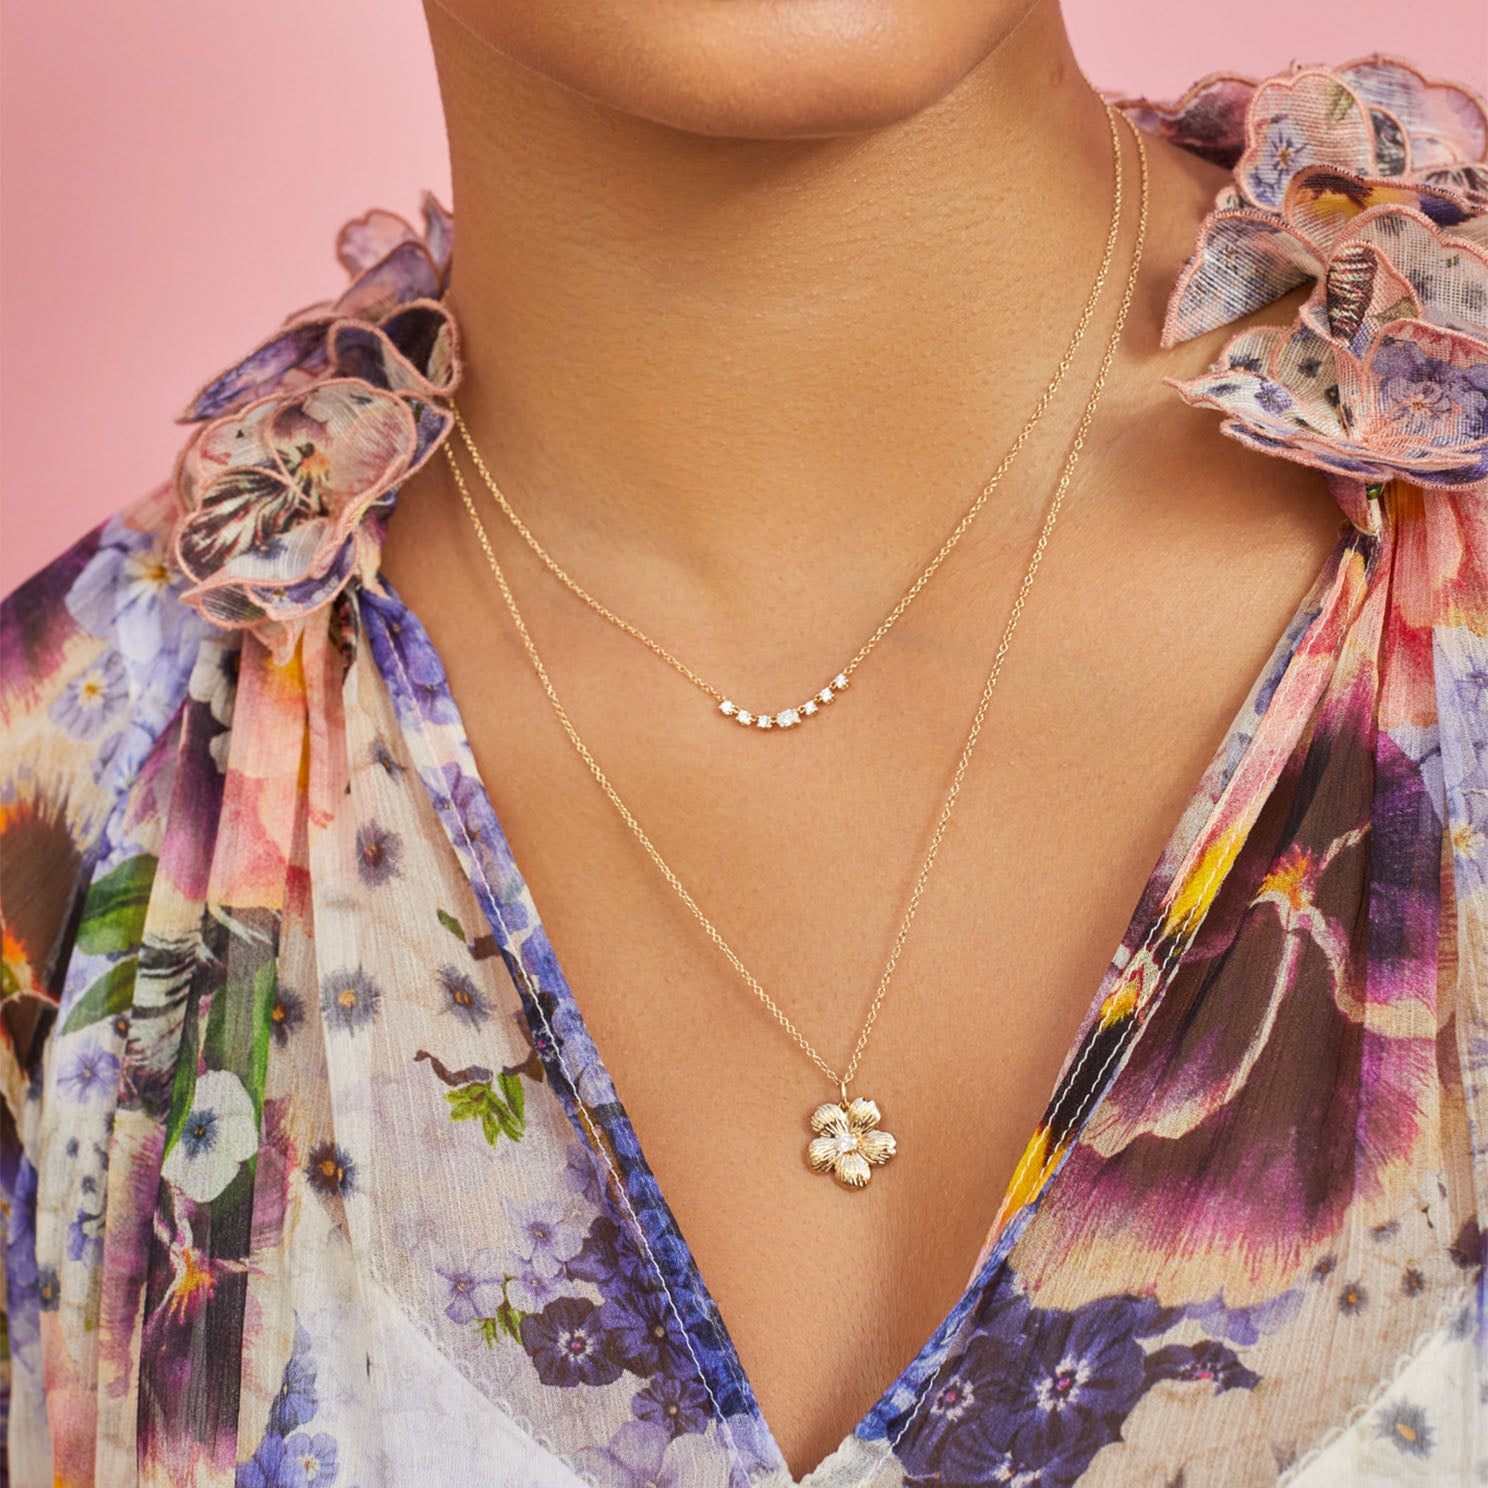 Cherry Blossom Necklace in 14k yellow gold styled on neck of model in floral blouse